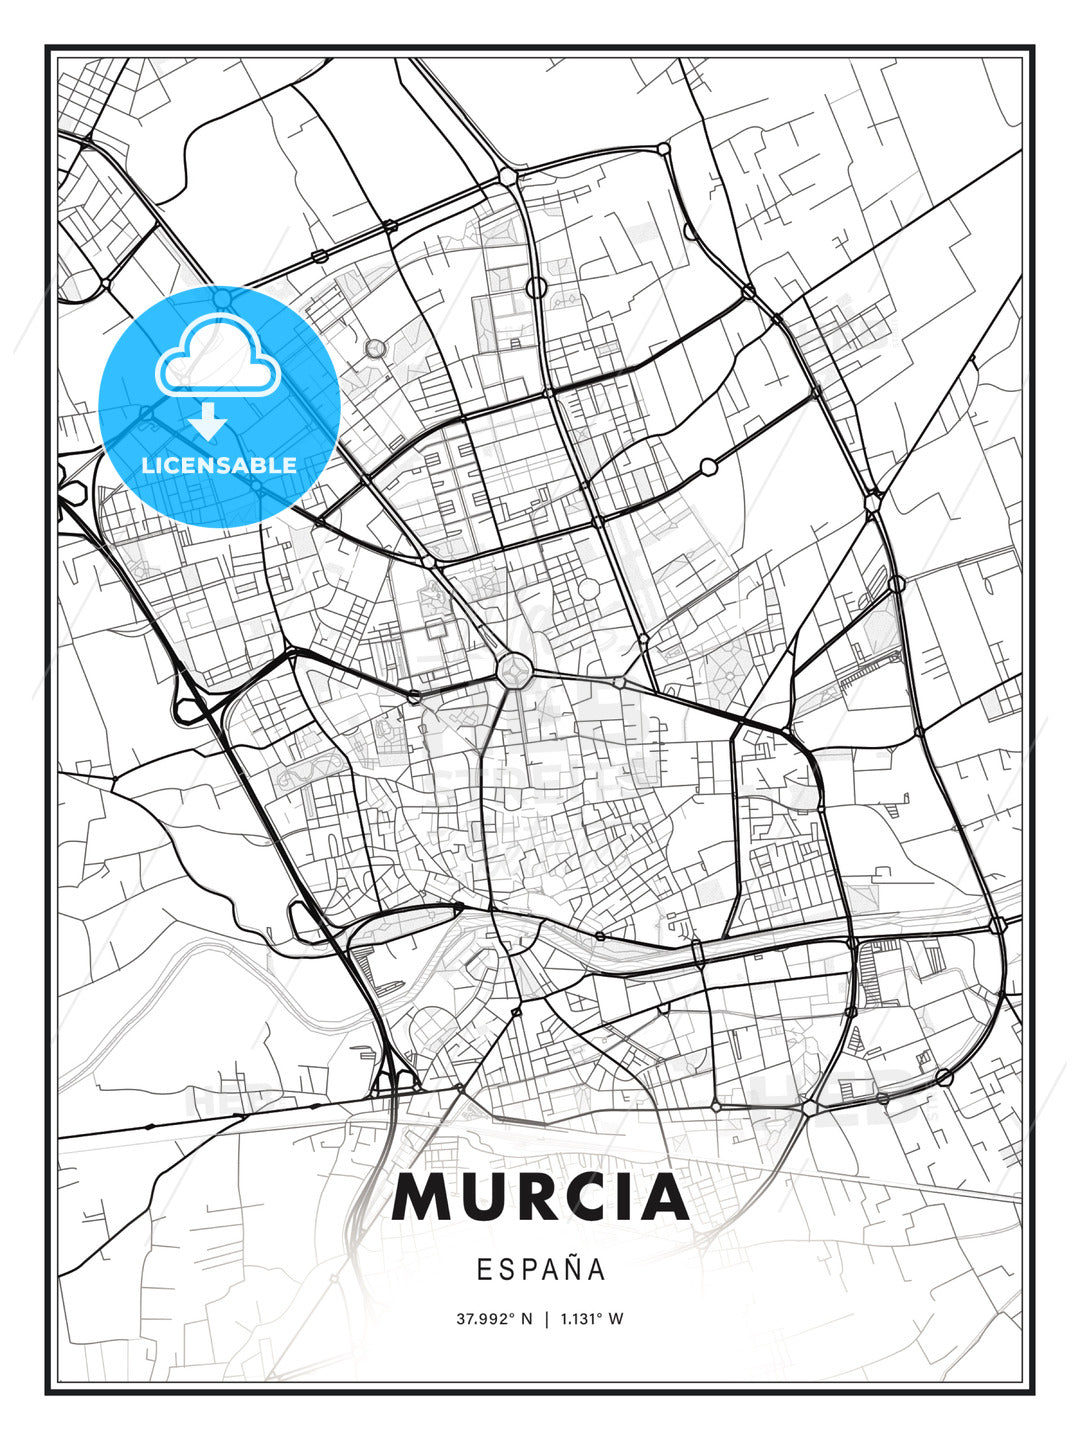 Murcia, Spain, Modern Print Template in Various Formats - HEBSTREITS Sketches